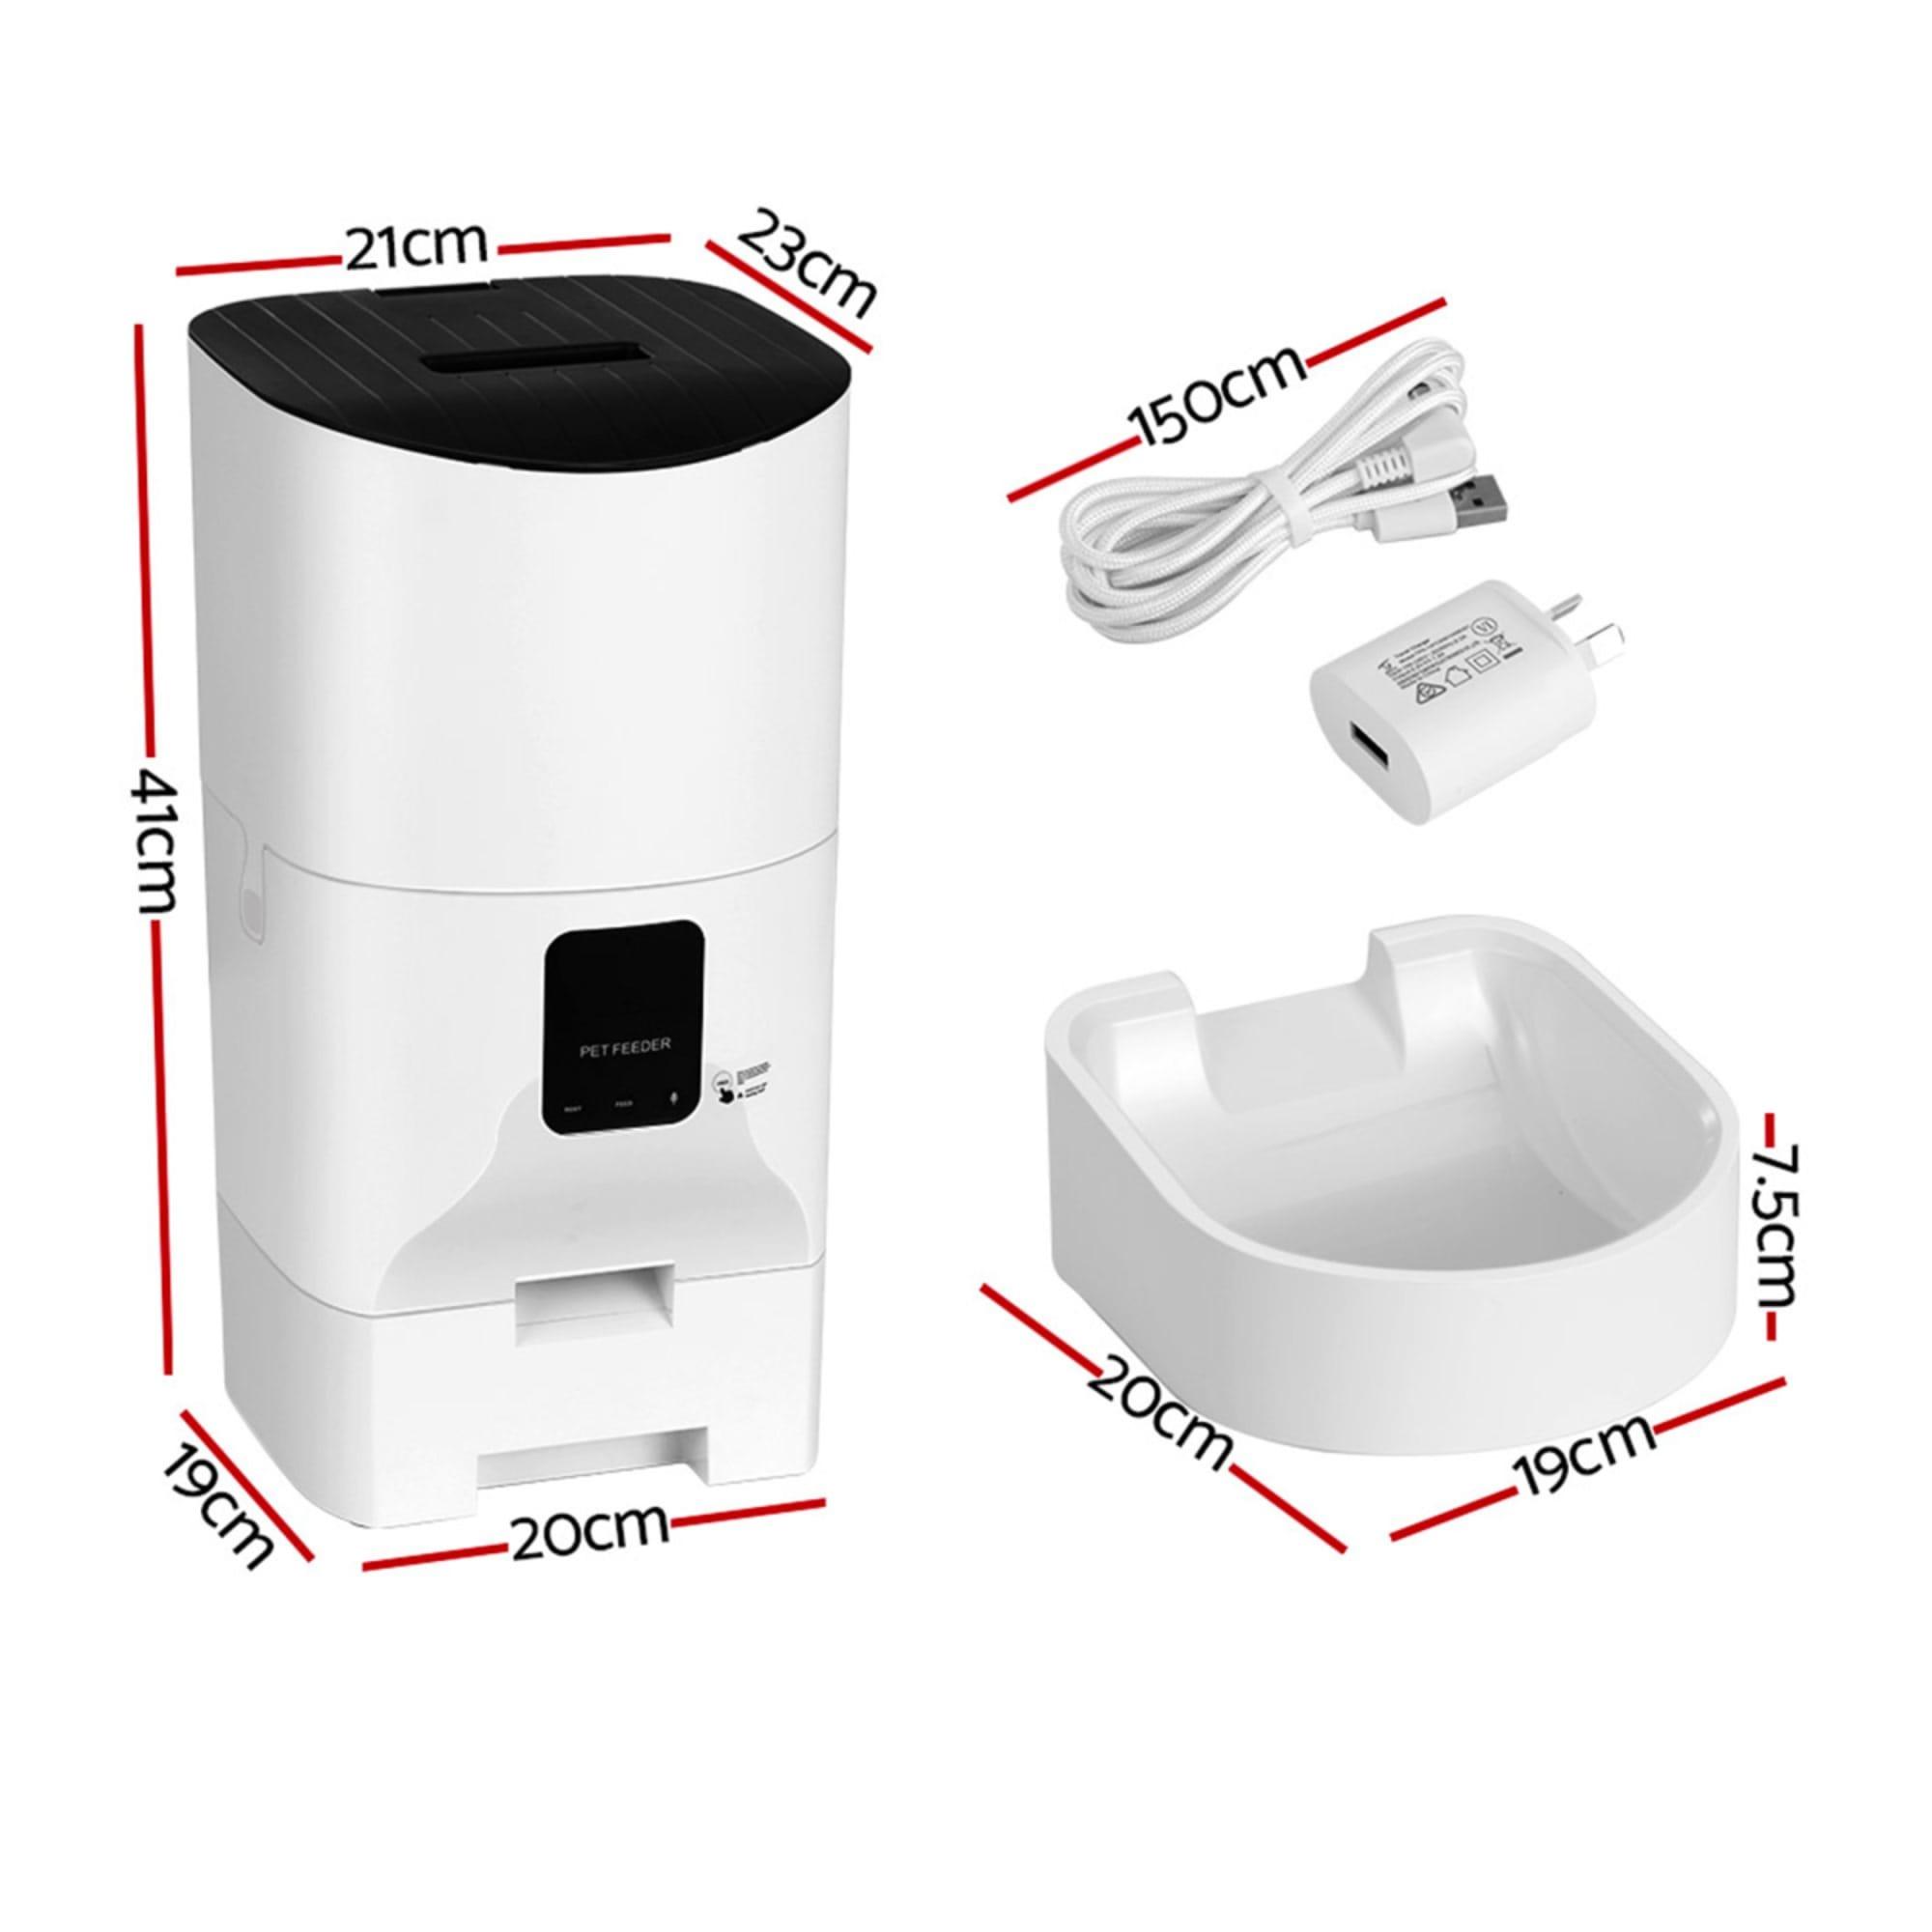 i.Pet Automatic Pet Feeder with WiFi Control 9L Image 4